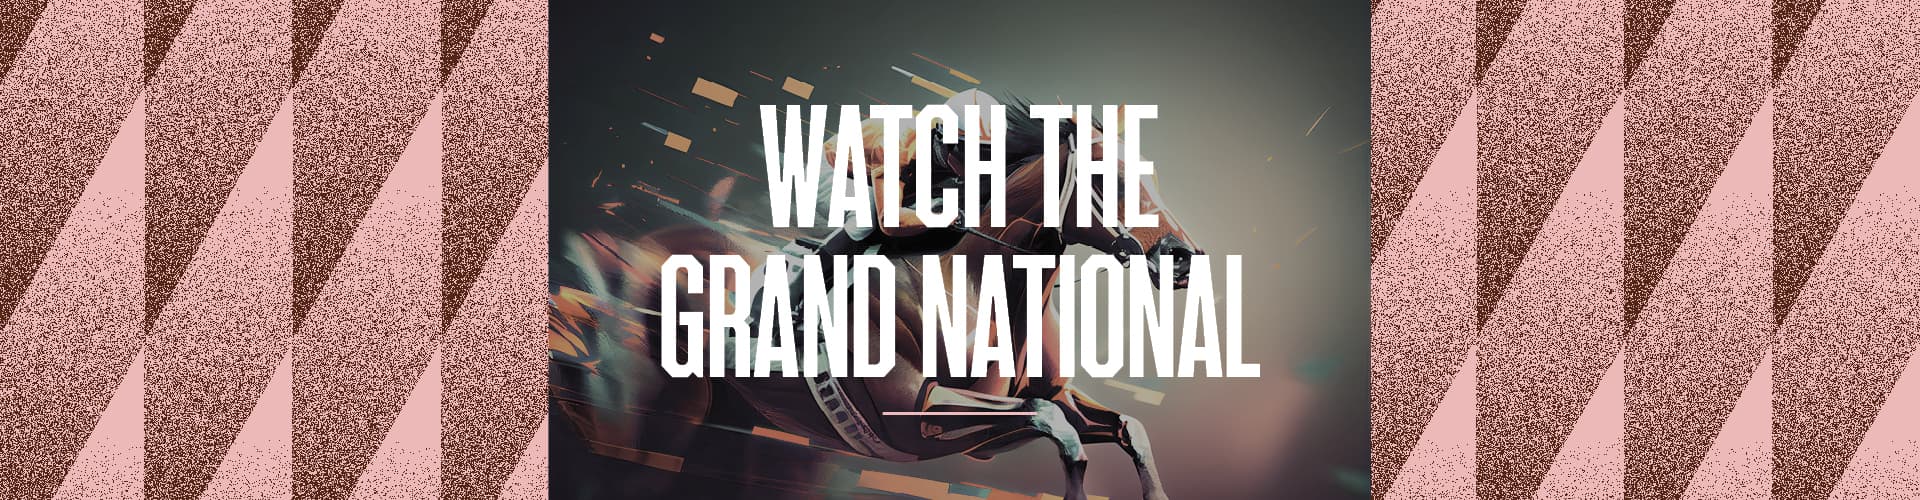 Watch the Grand National at Clubhouse 5